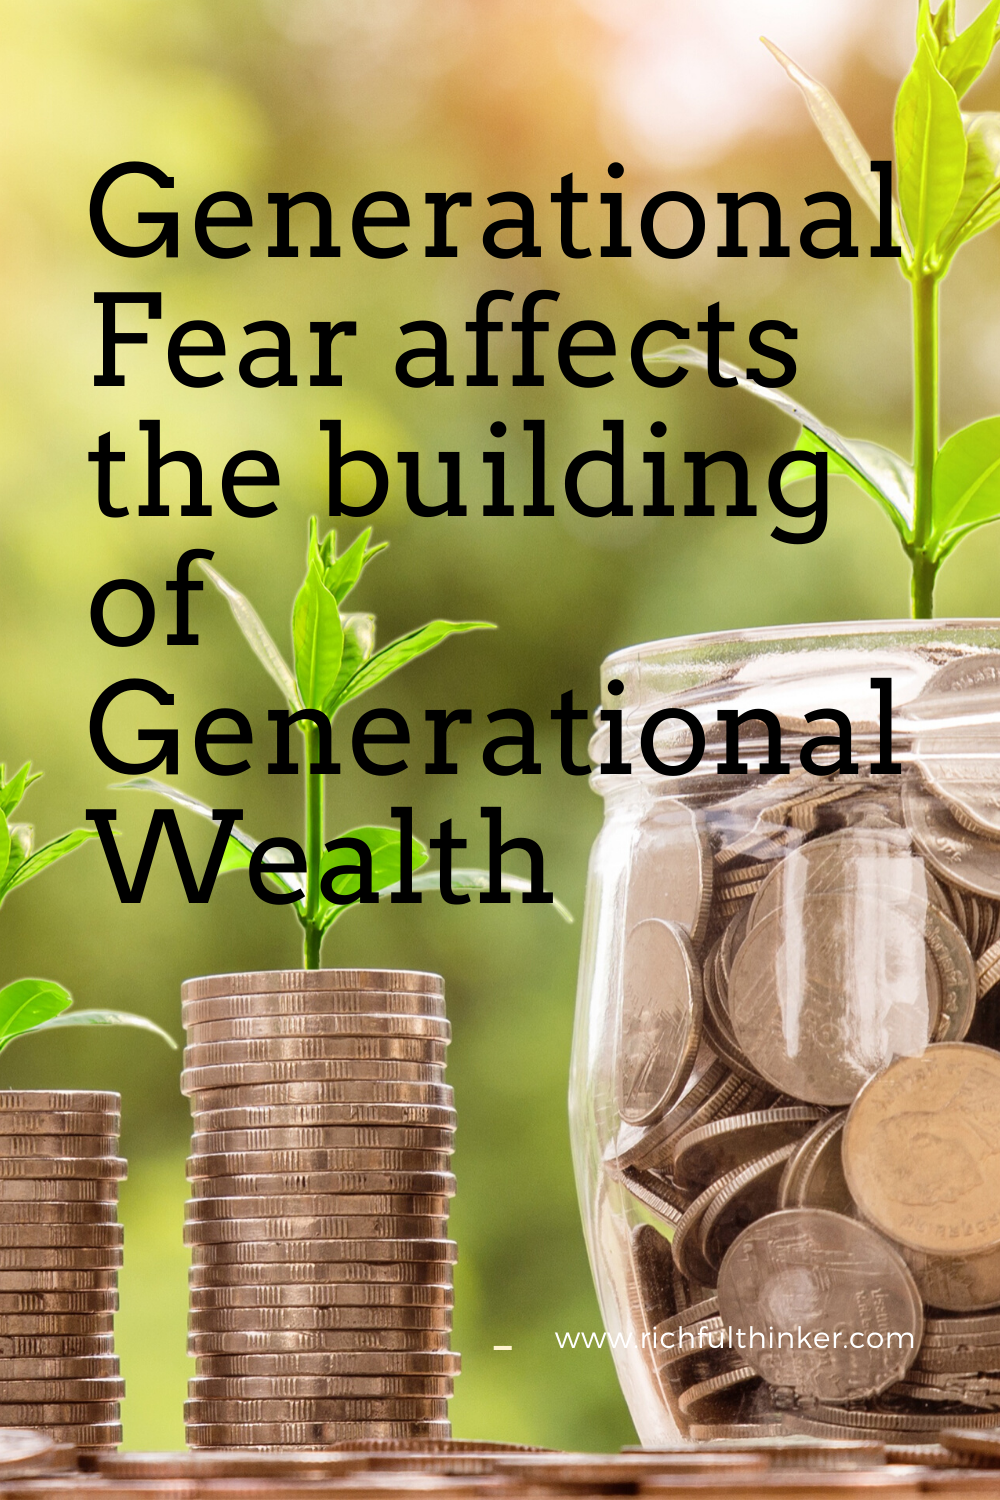 Generational Fear affects the building of generational wealth